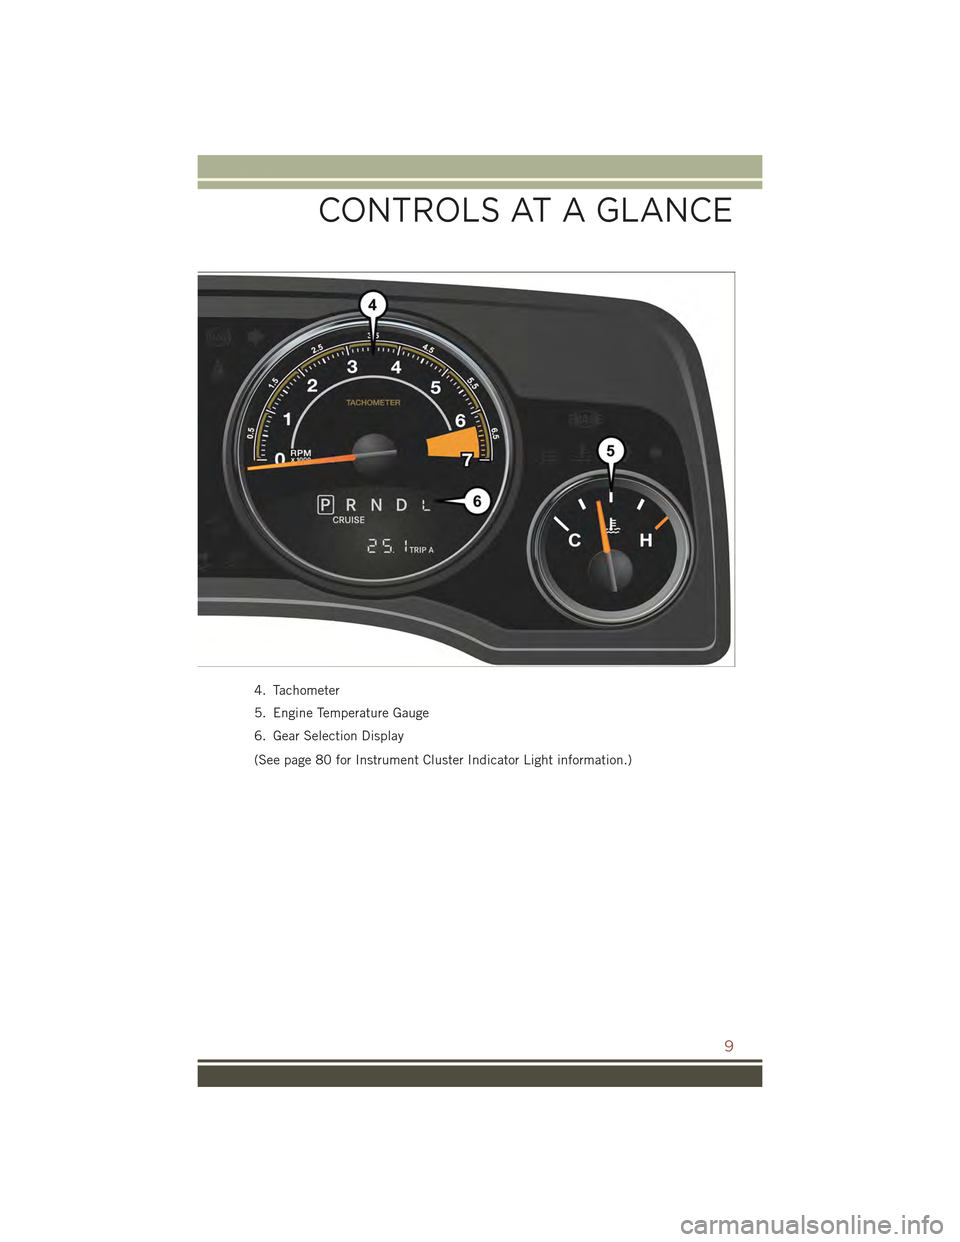 JEEP COMPASS 2015 1.G User Guide 4. Tachometer
5. Engine Temperature Gauge
6. Gear Selection Display
(See page 80 for Instrument Cluster Indicator Light information.)
CONTROLS AT A GLANCE
9 